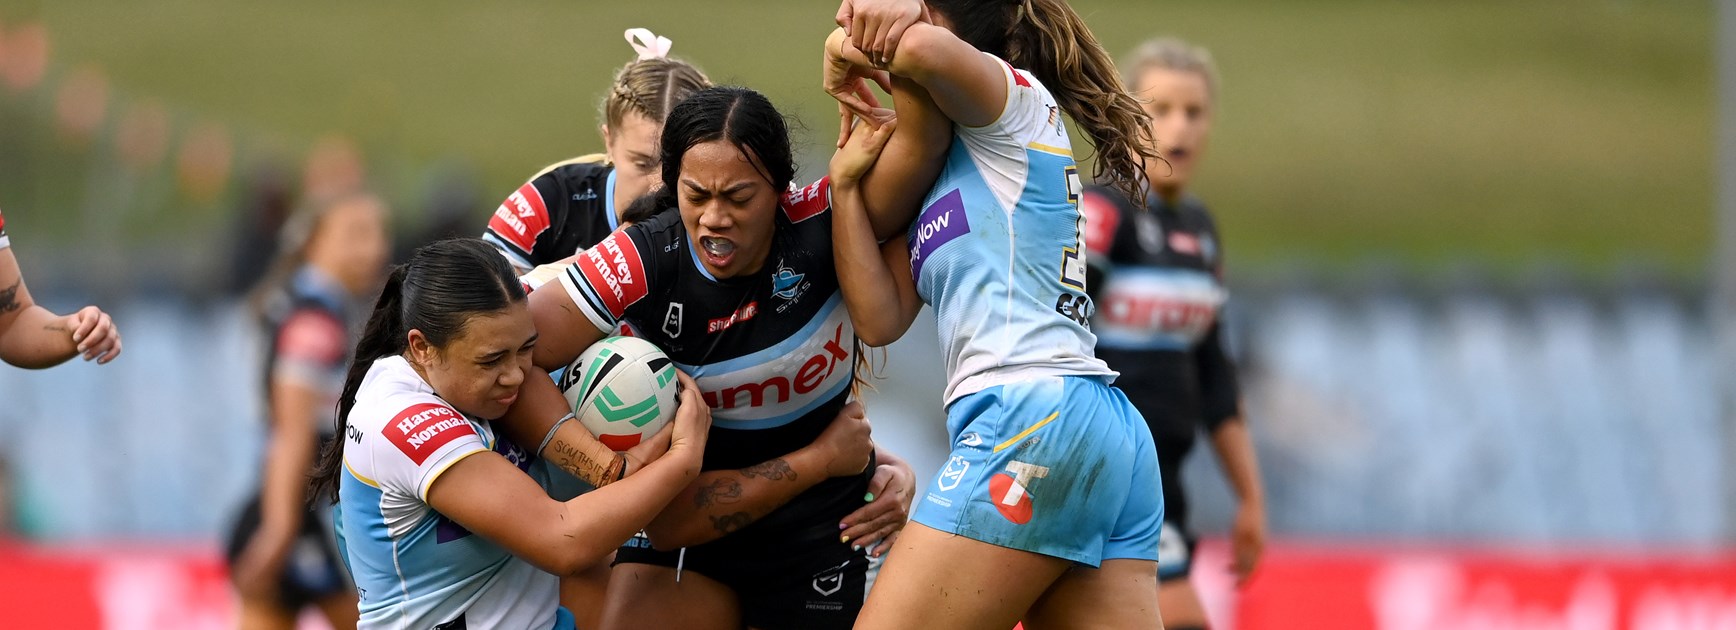 Titans snatch last gasp win against Sharks to continue unbeaten run